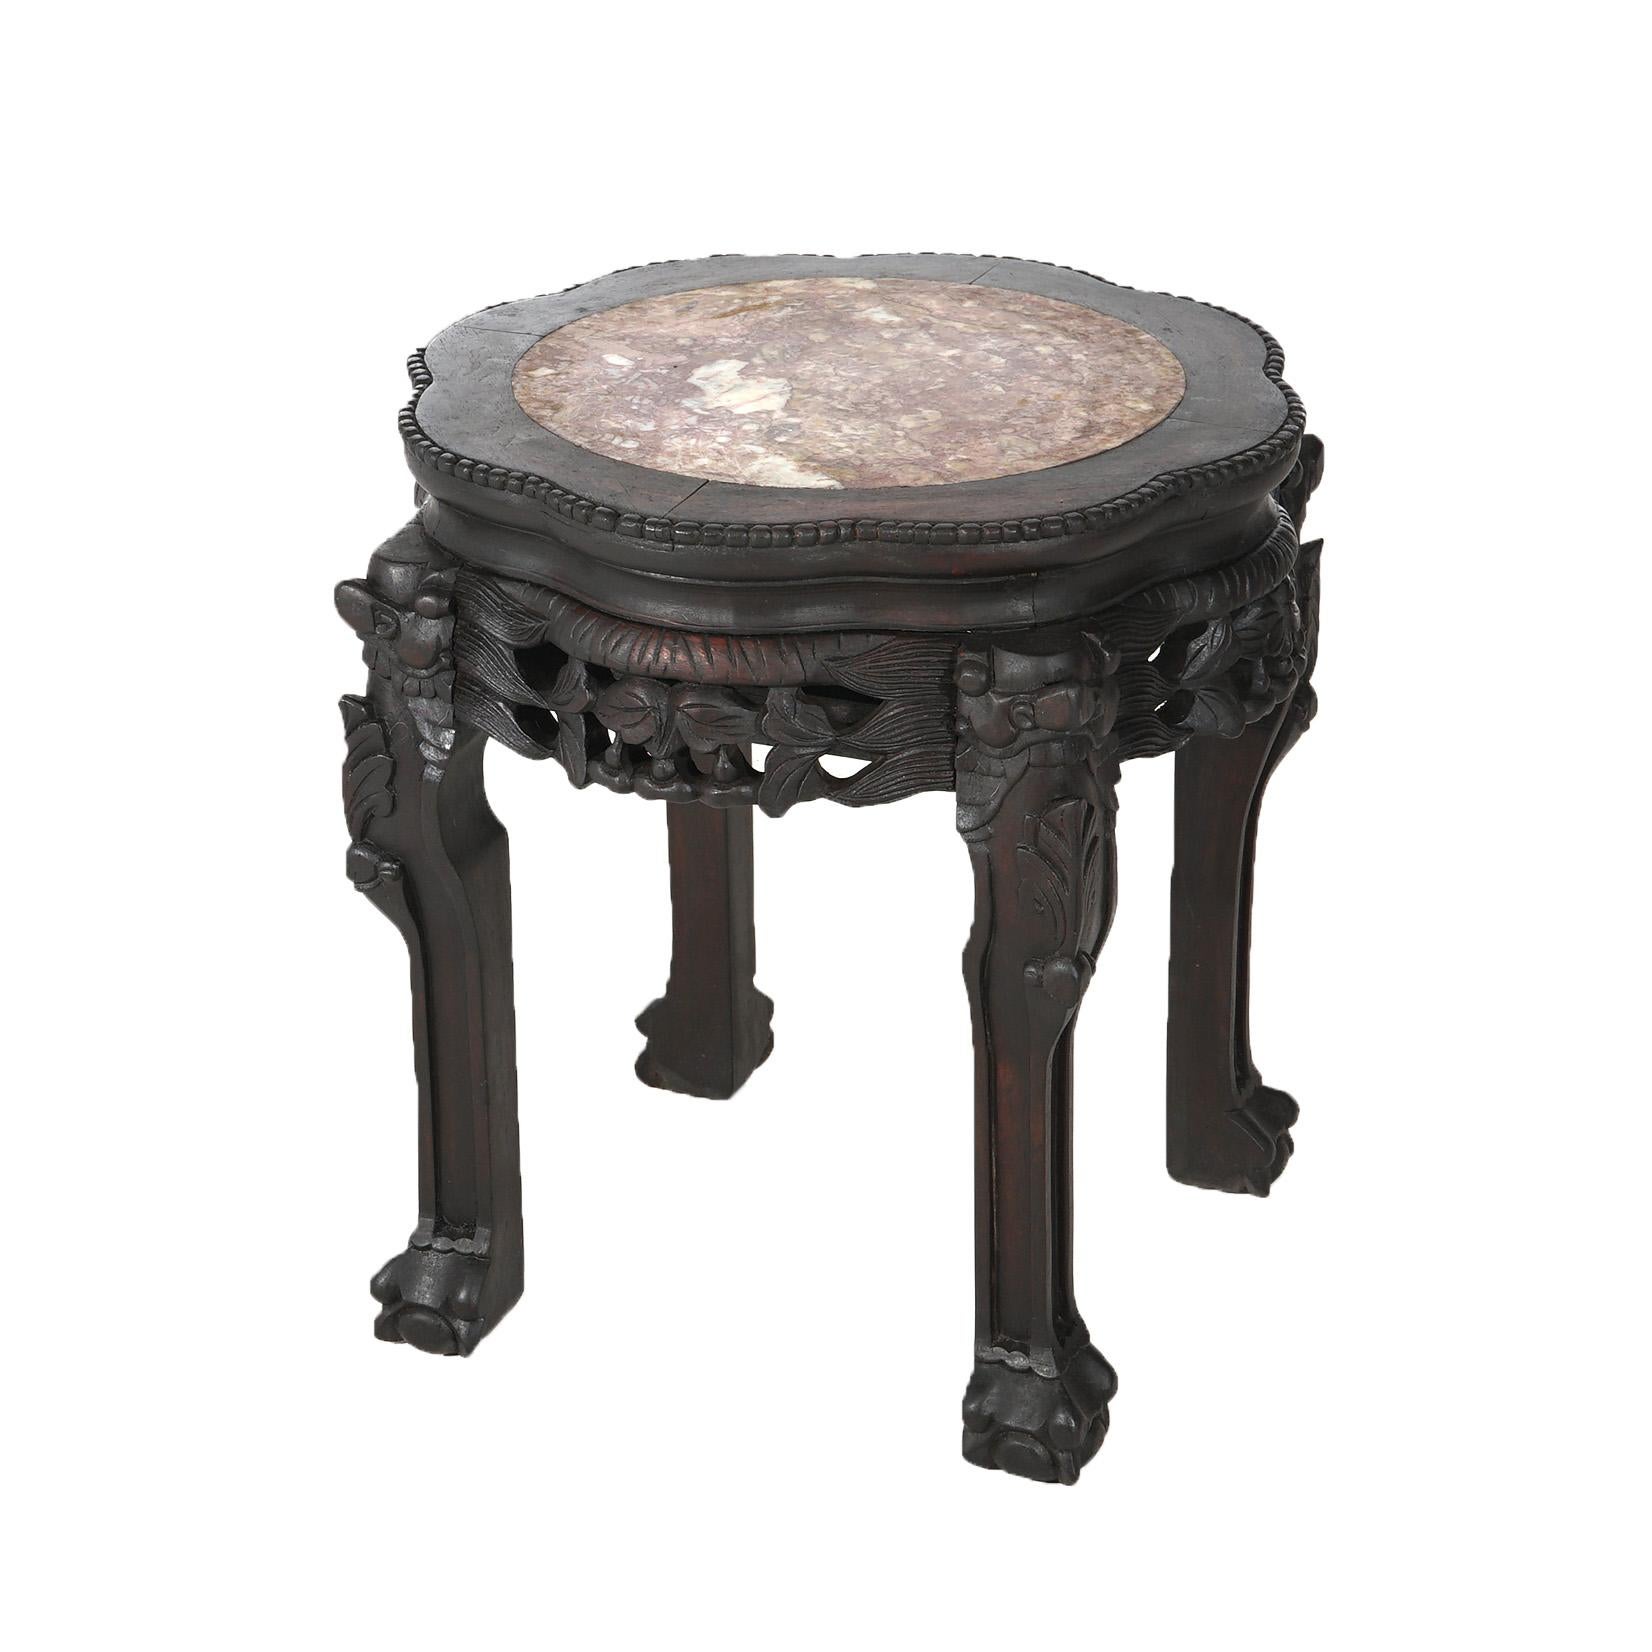 Antique Chinese Foliate Carved Rosewood Stand with Inset Rouge Marble Top C1910

Measures - 17.75